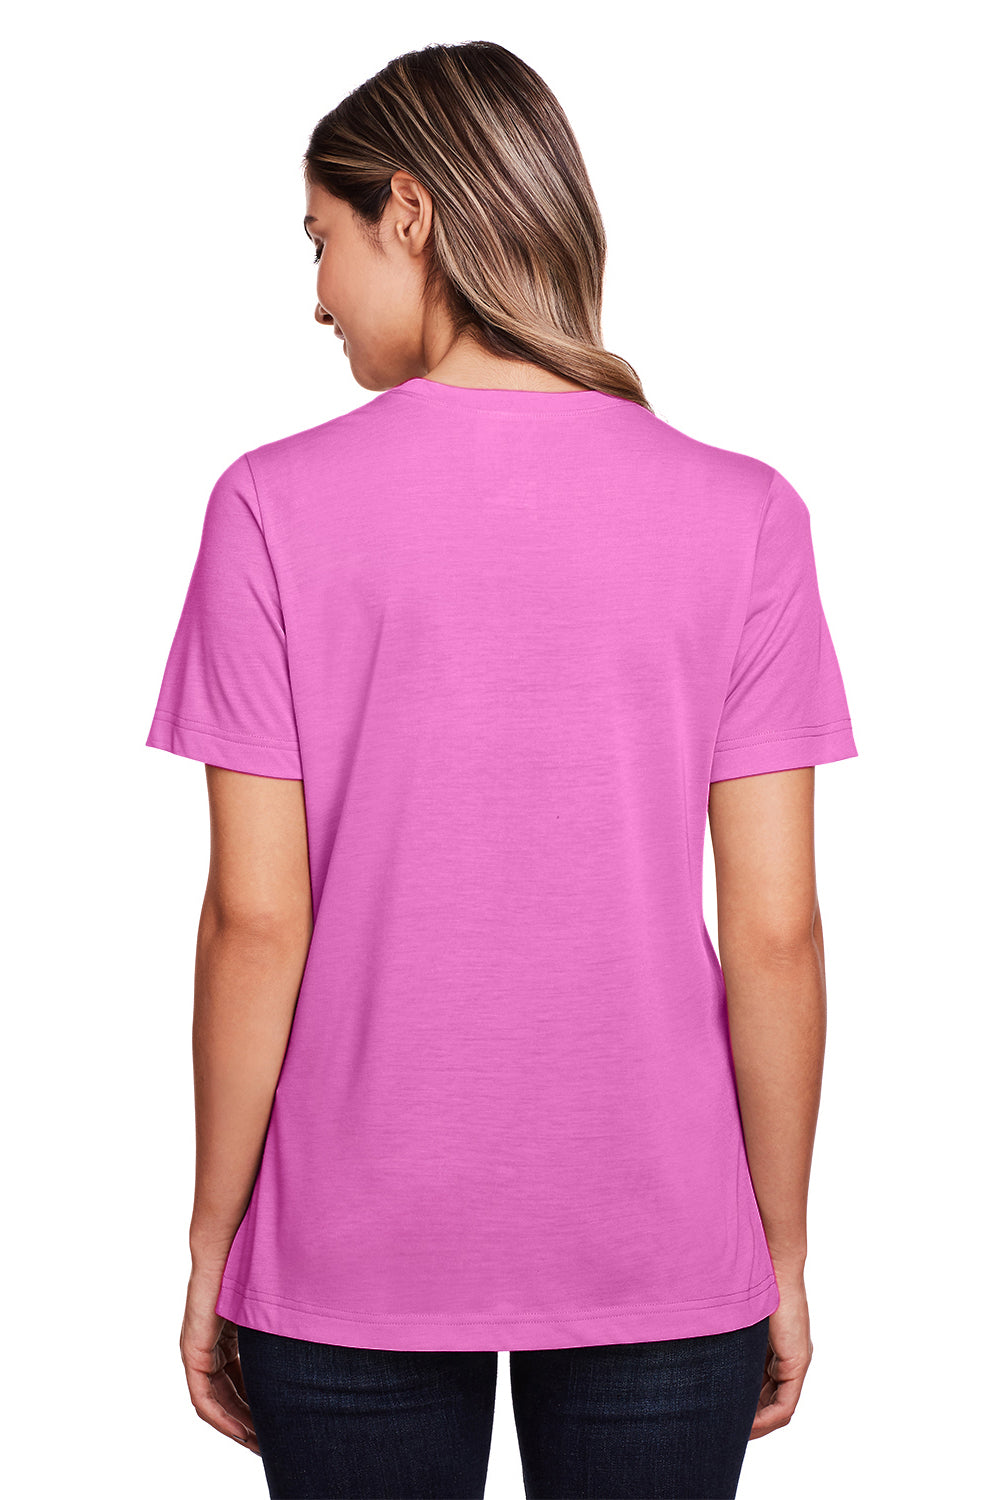 Core 365 CE111W Womens Fusion ChromaSoft Performance Moisture Wicking Short Sleeve Scoop Neck T-Shirt Charity Pink Back